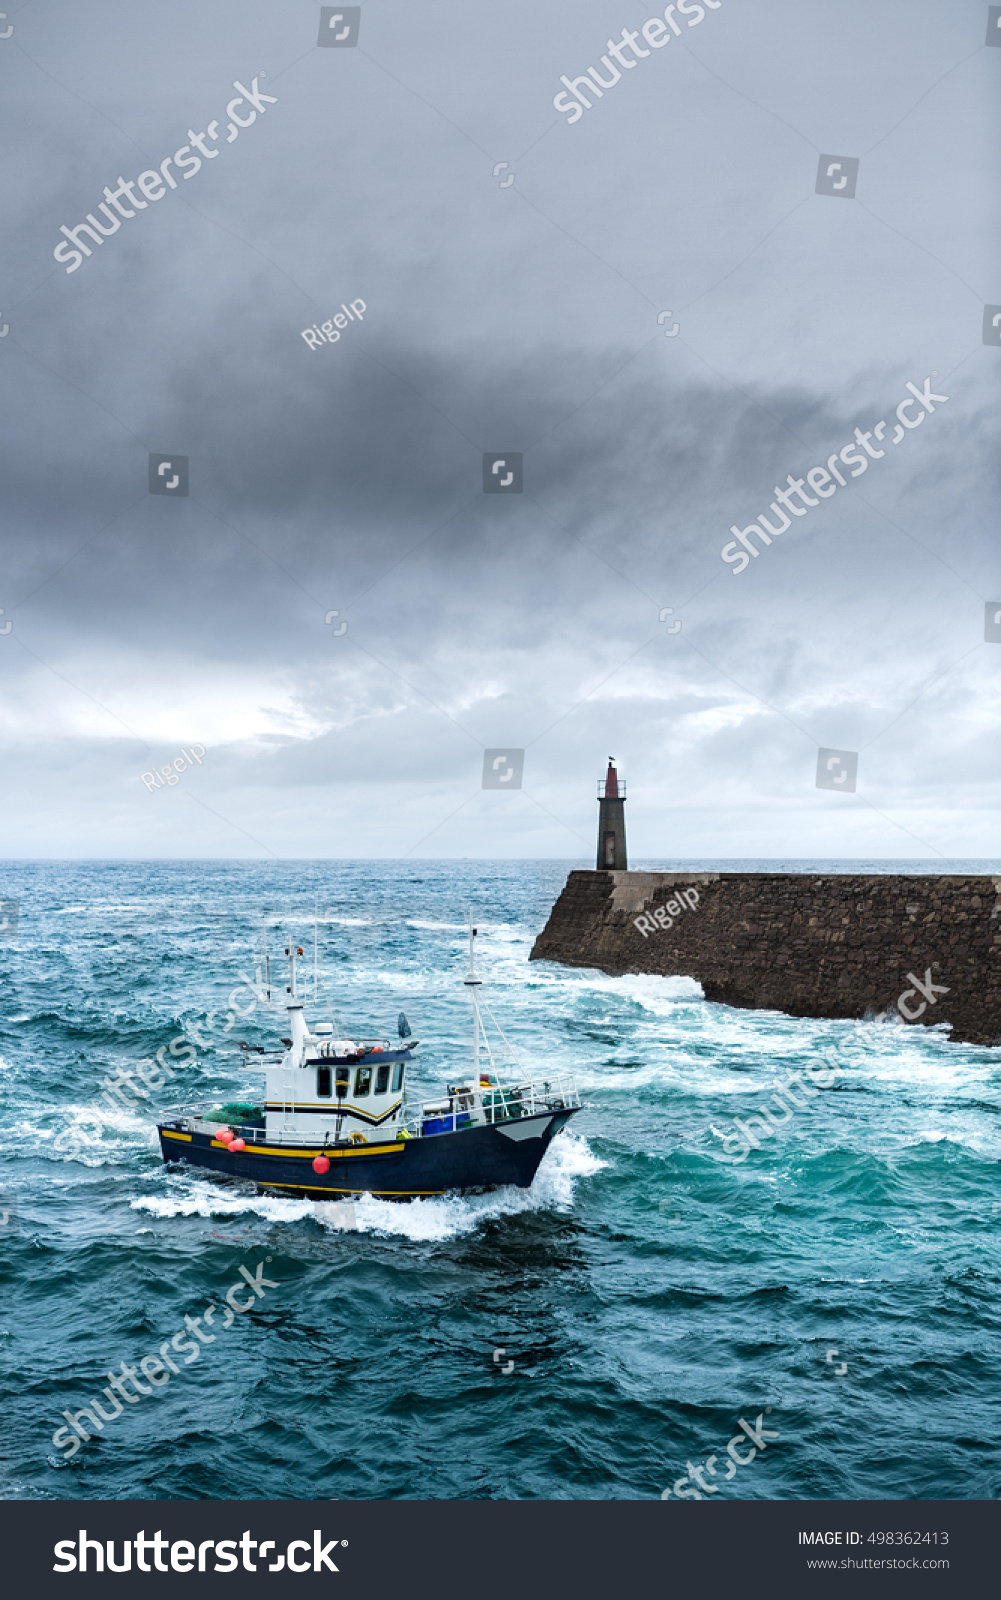 Fishing vessel under storm arriving at pier. 
It's a boat or ship used to catch fish in the sea. Fishing can be affected by storms.
Storms implies conditions like strong wind, precipitations or rain. #498362413